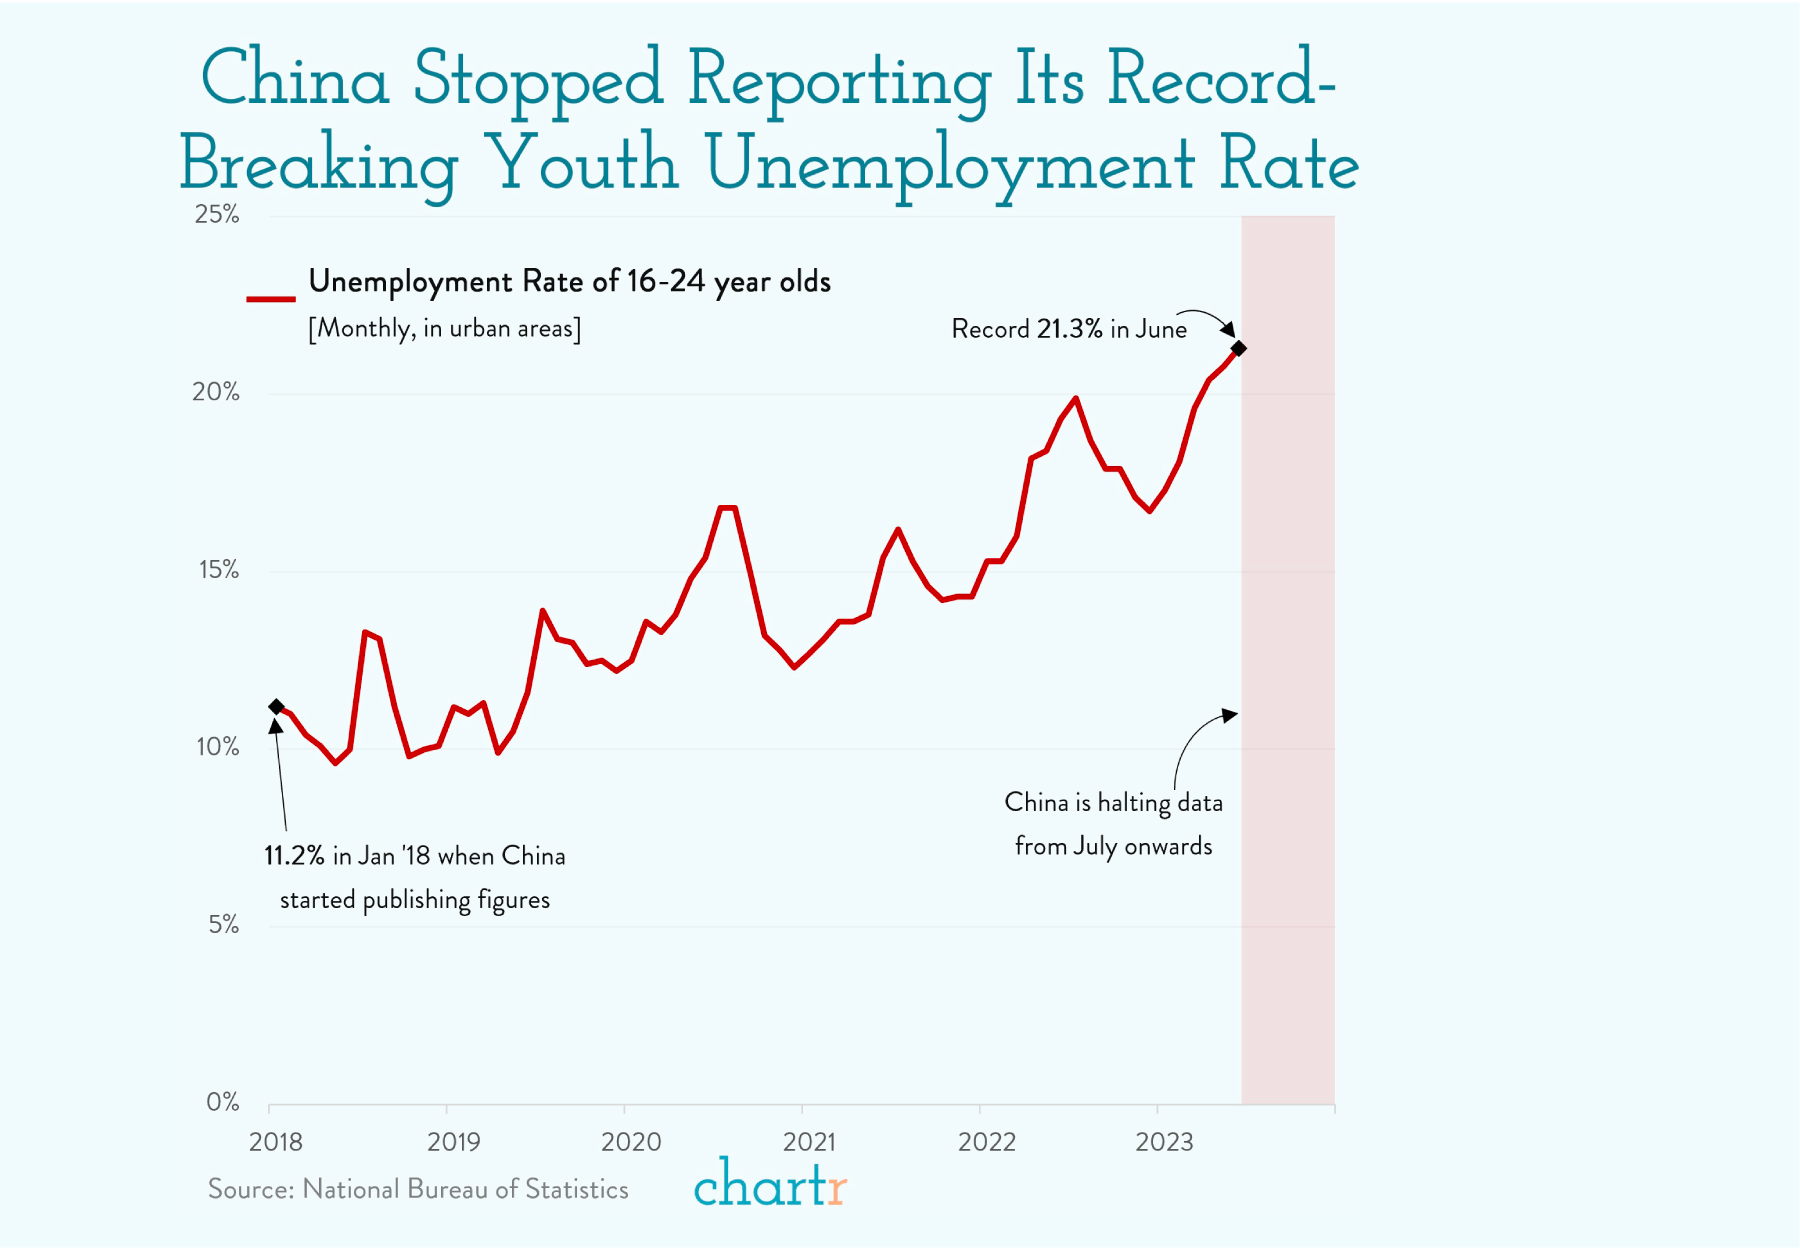 A graph showing the youth unemployment rate in china